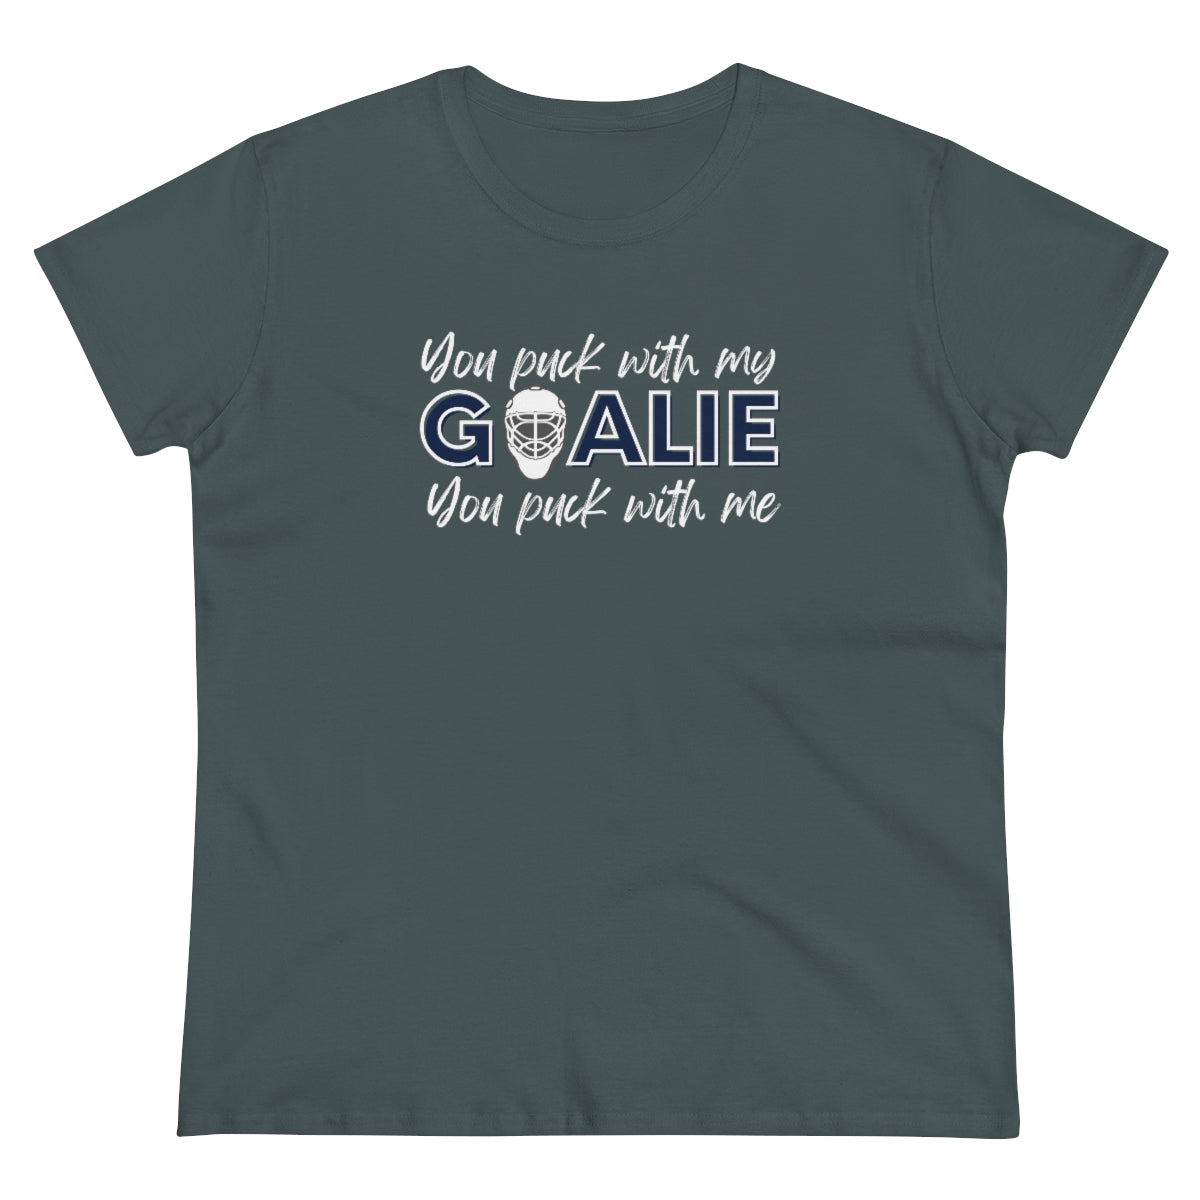 You puck with my Goalie - You puck with me - Ladies Tee